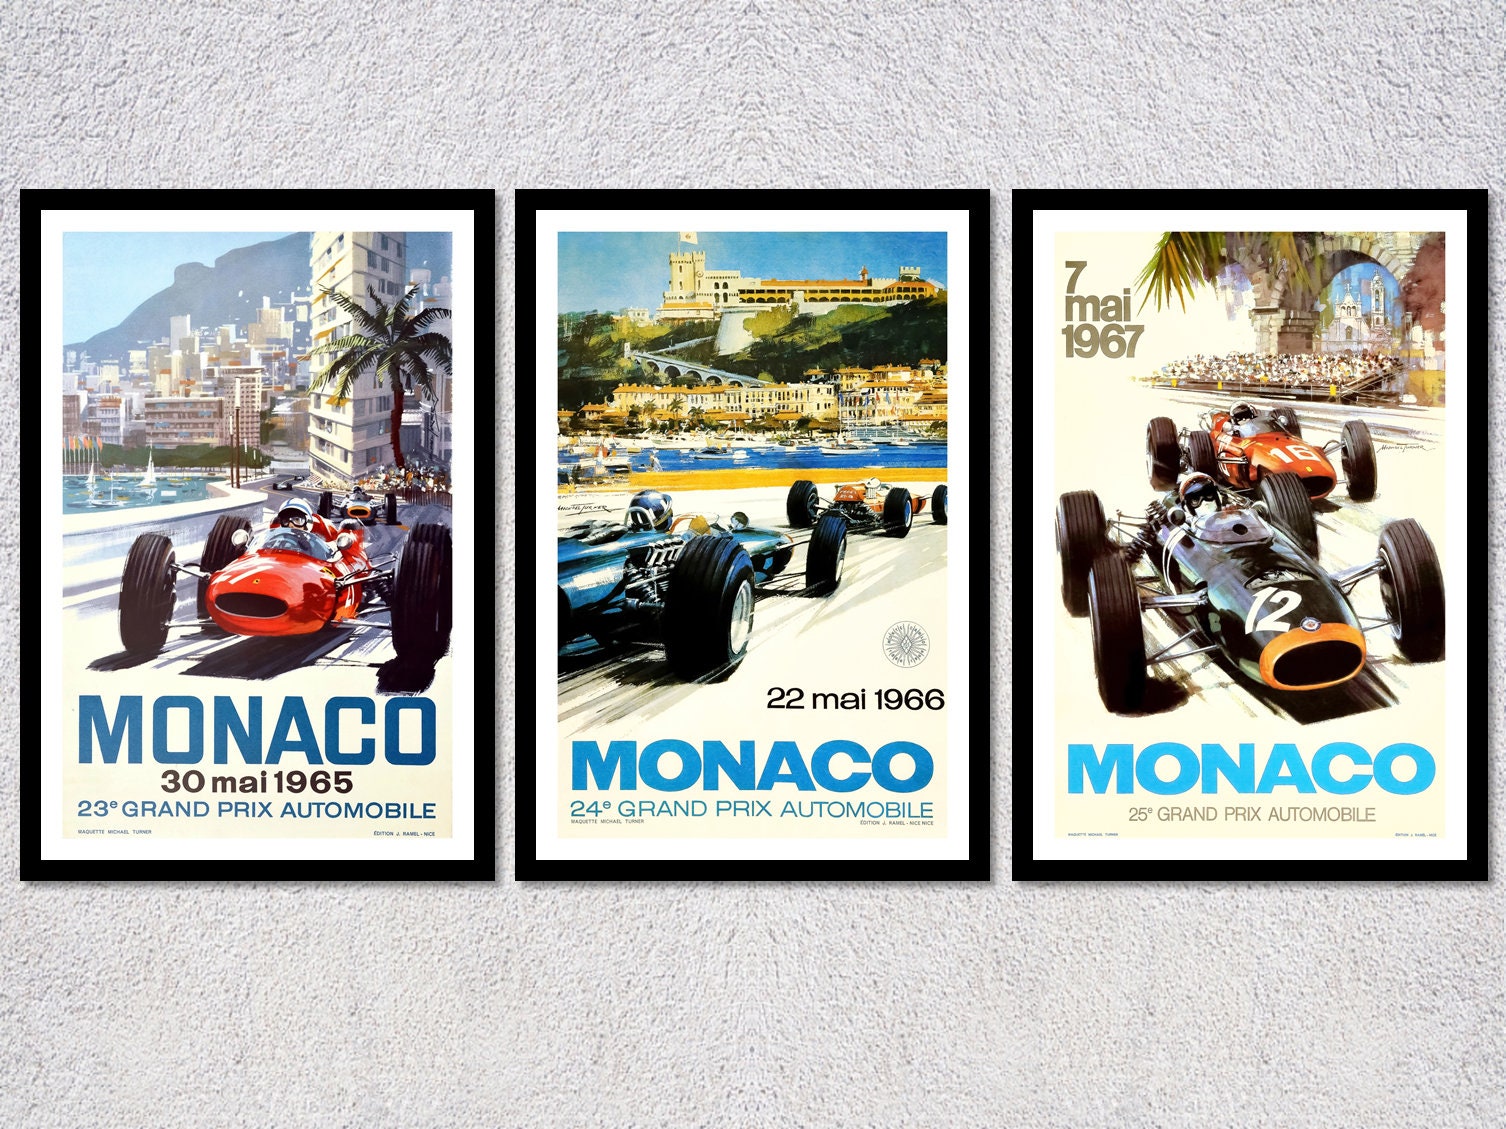 The Alphabet Grand Prix Poster - Letters and Animals